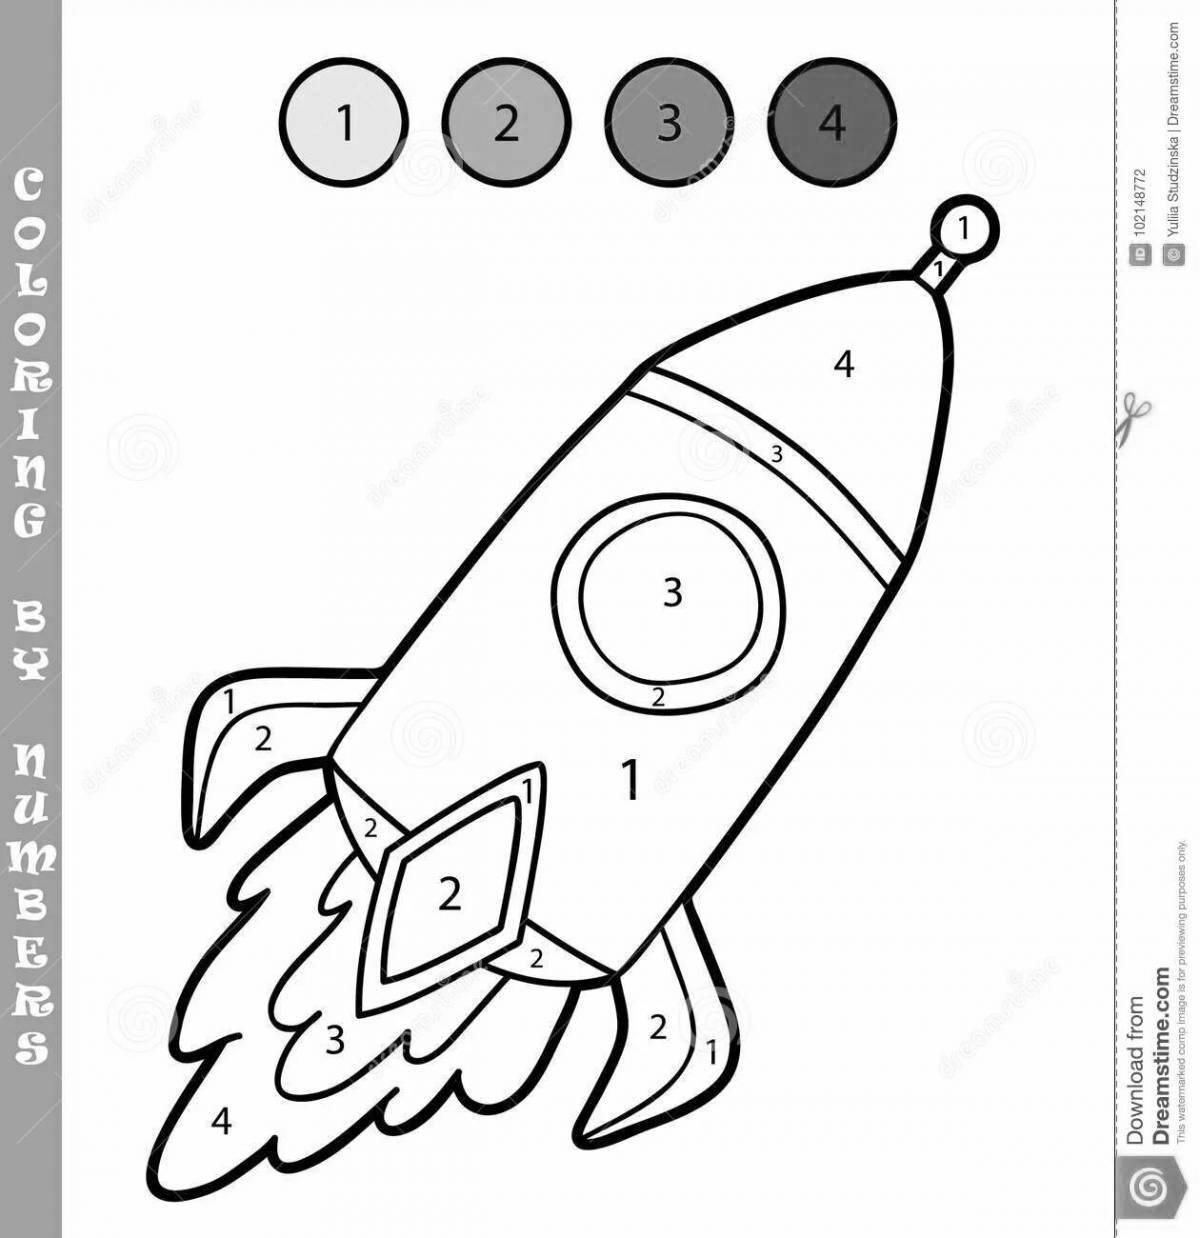 Rocket coloring book for children 4-5 years old